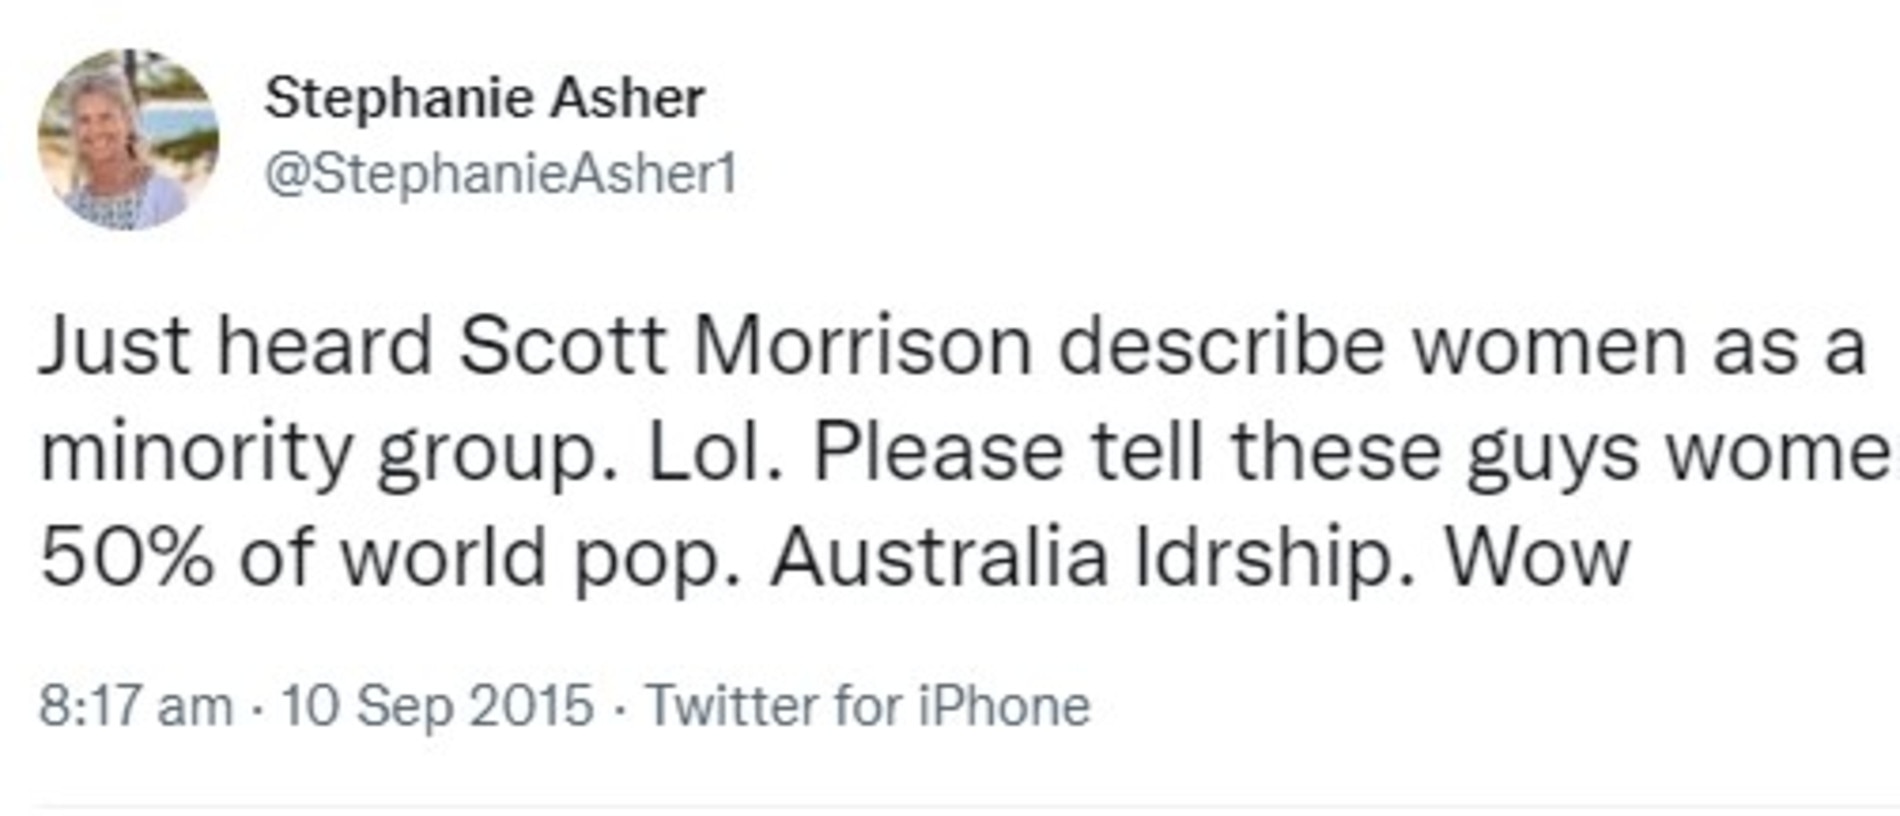 Scott Morrison was asked about a tweet from candidate Stephanie Asher.